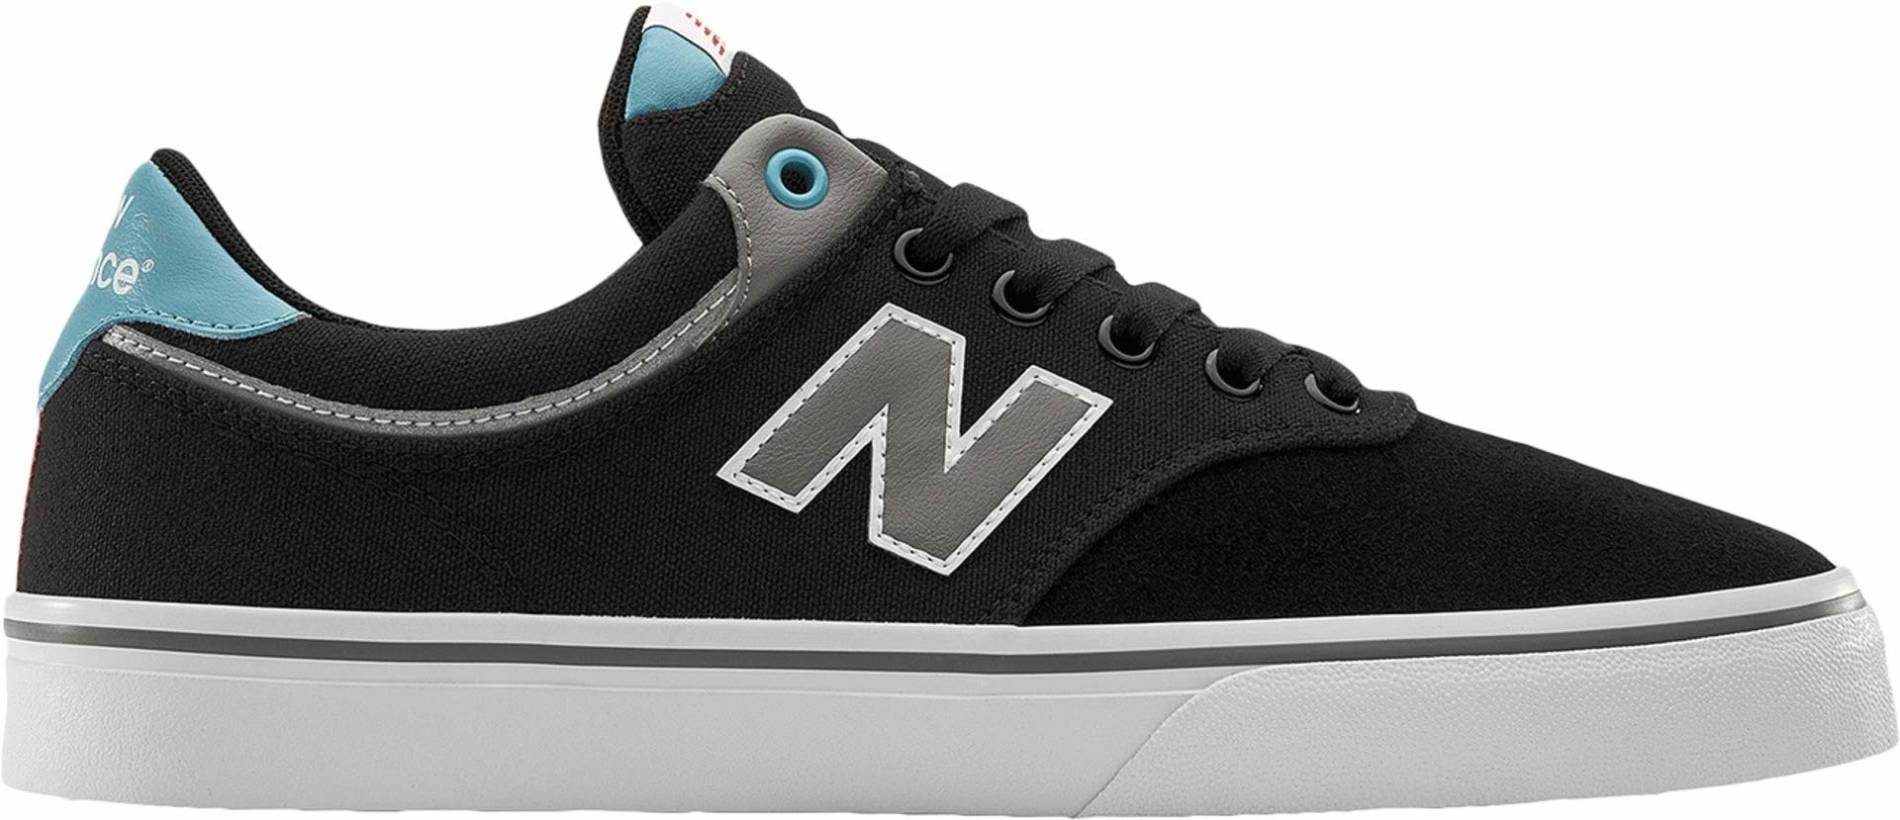 Only $52 + Review of New Balance 255 